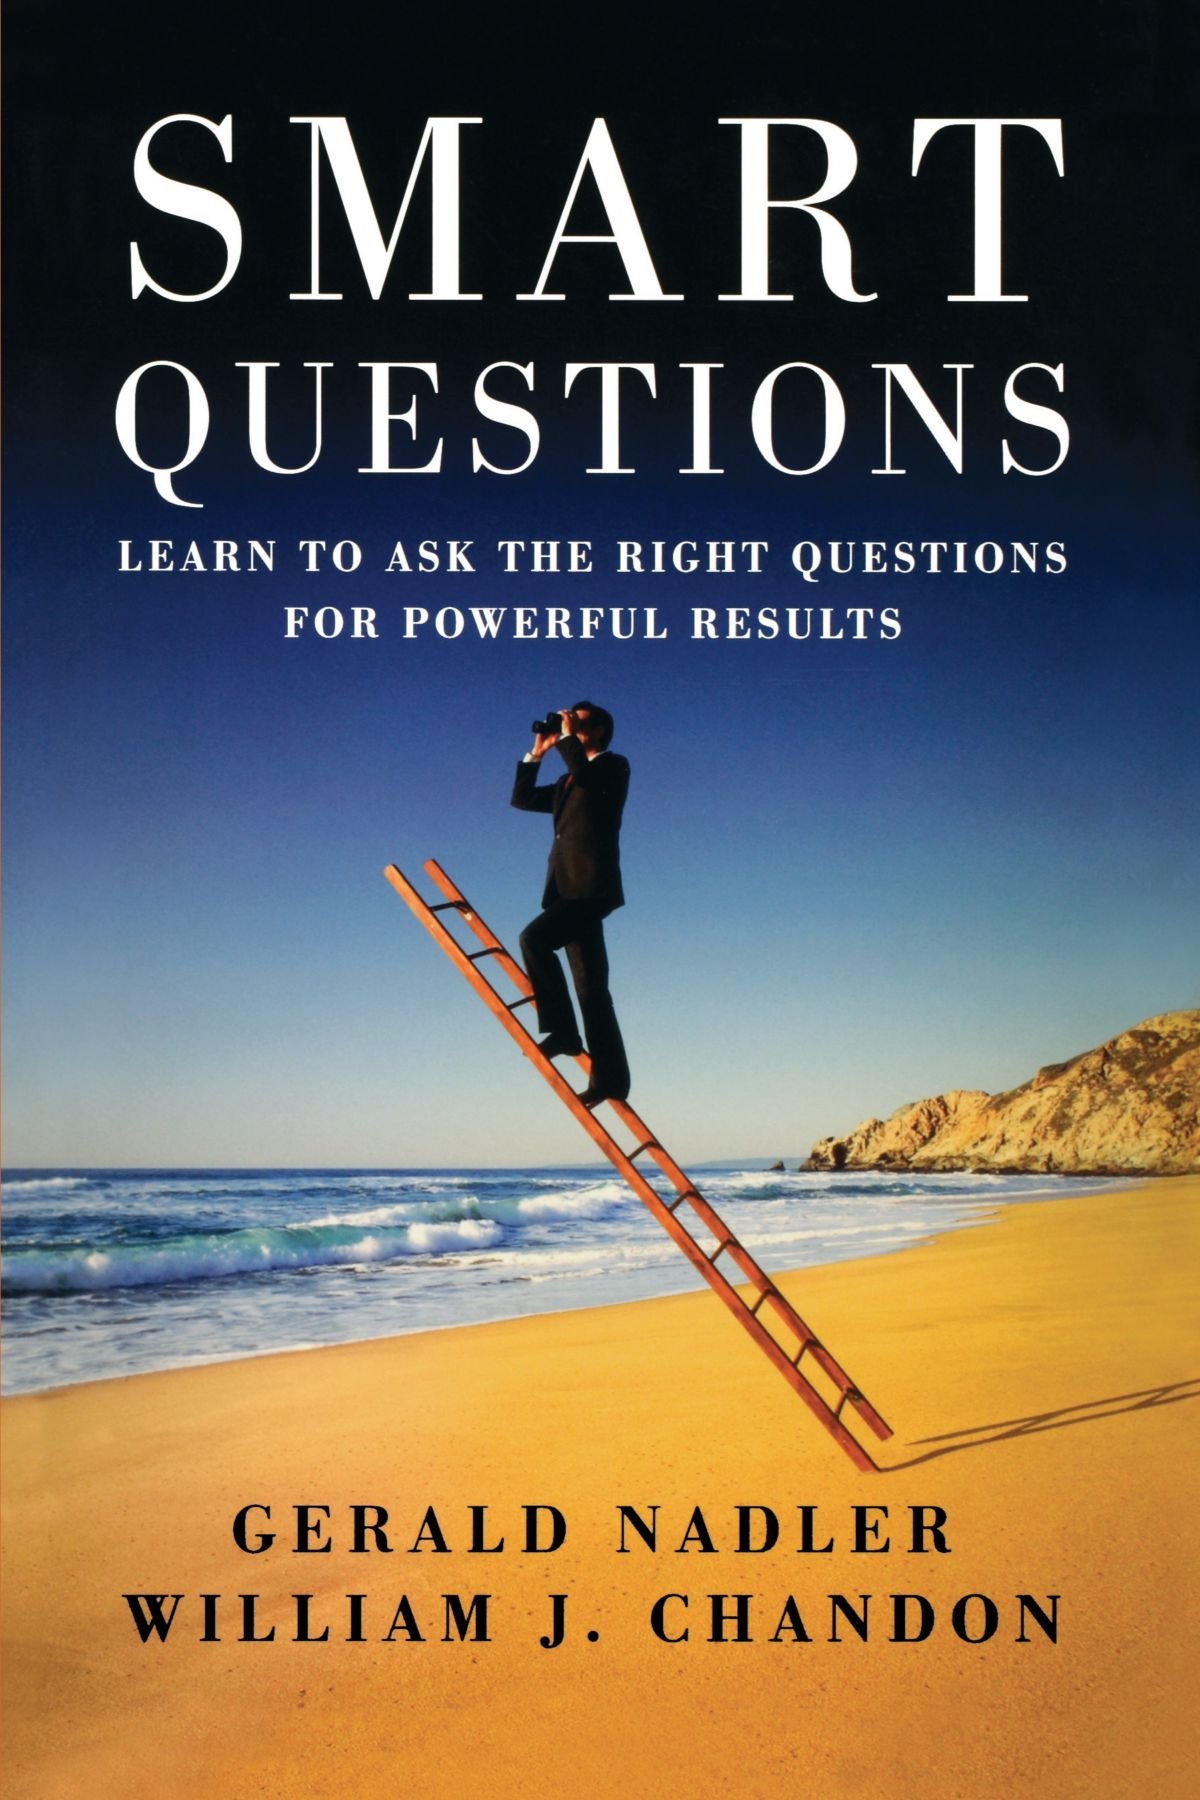 Smart Questions - Learn To Ask The Right Questions For Powerful Results (2004)